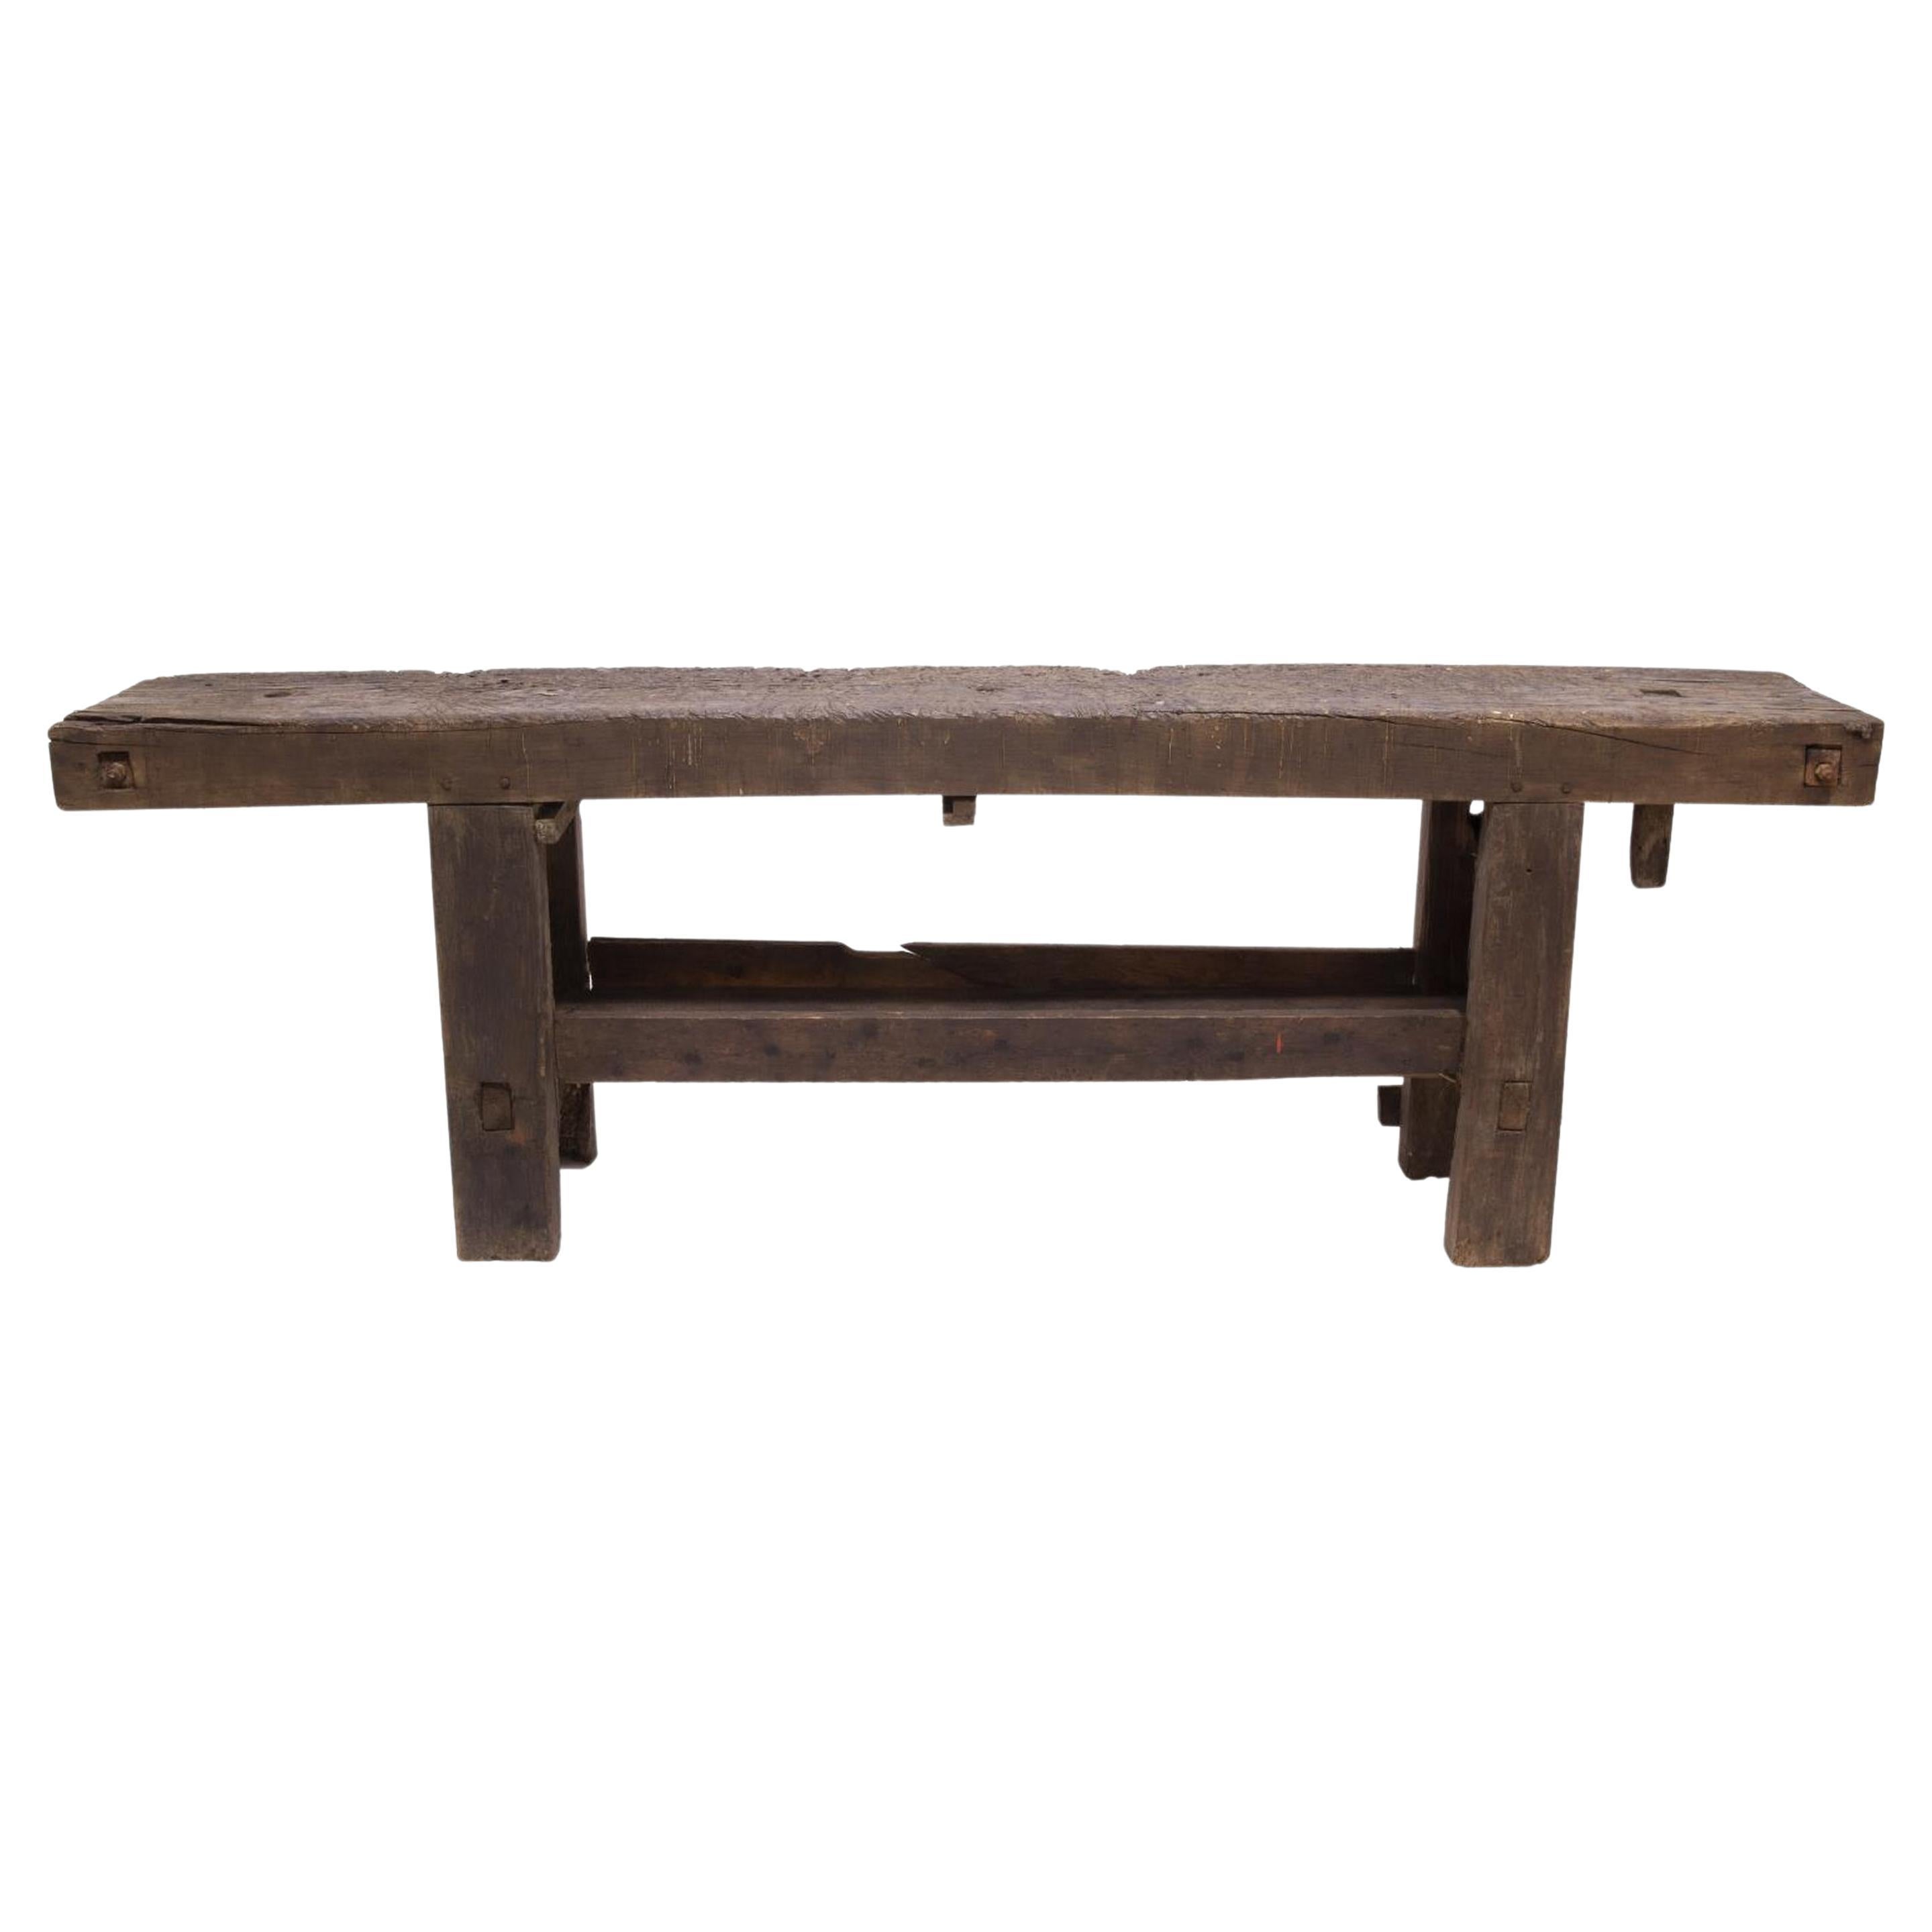 A classic 19th century French carpenter's table. It features a four inch thick top showing original saw markings and nail holes, creating a gorgeous patina that illustrates it's active use over many years by a French artisan carpenter. A heavy